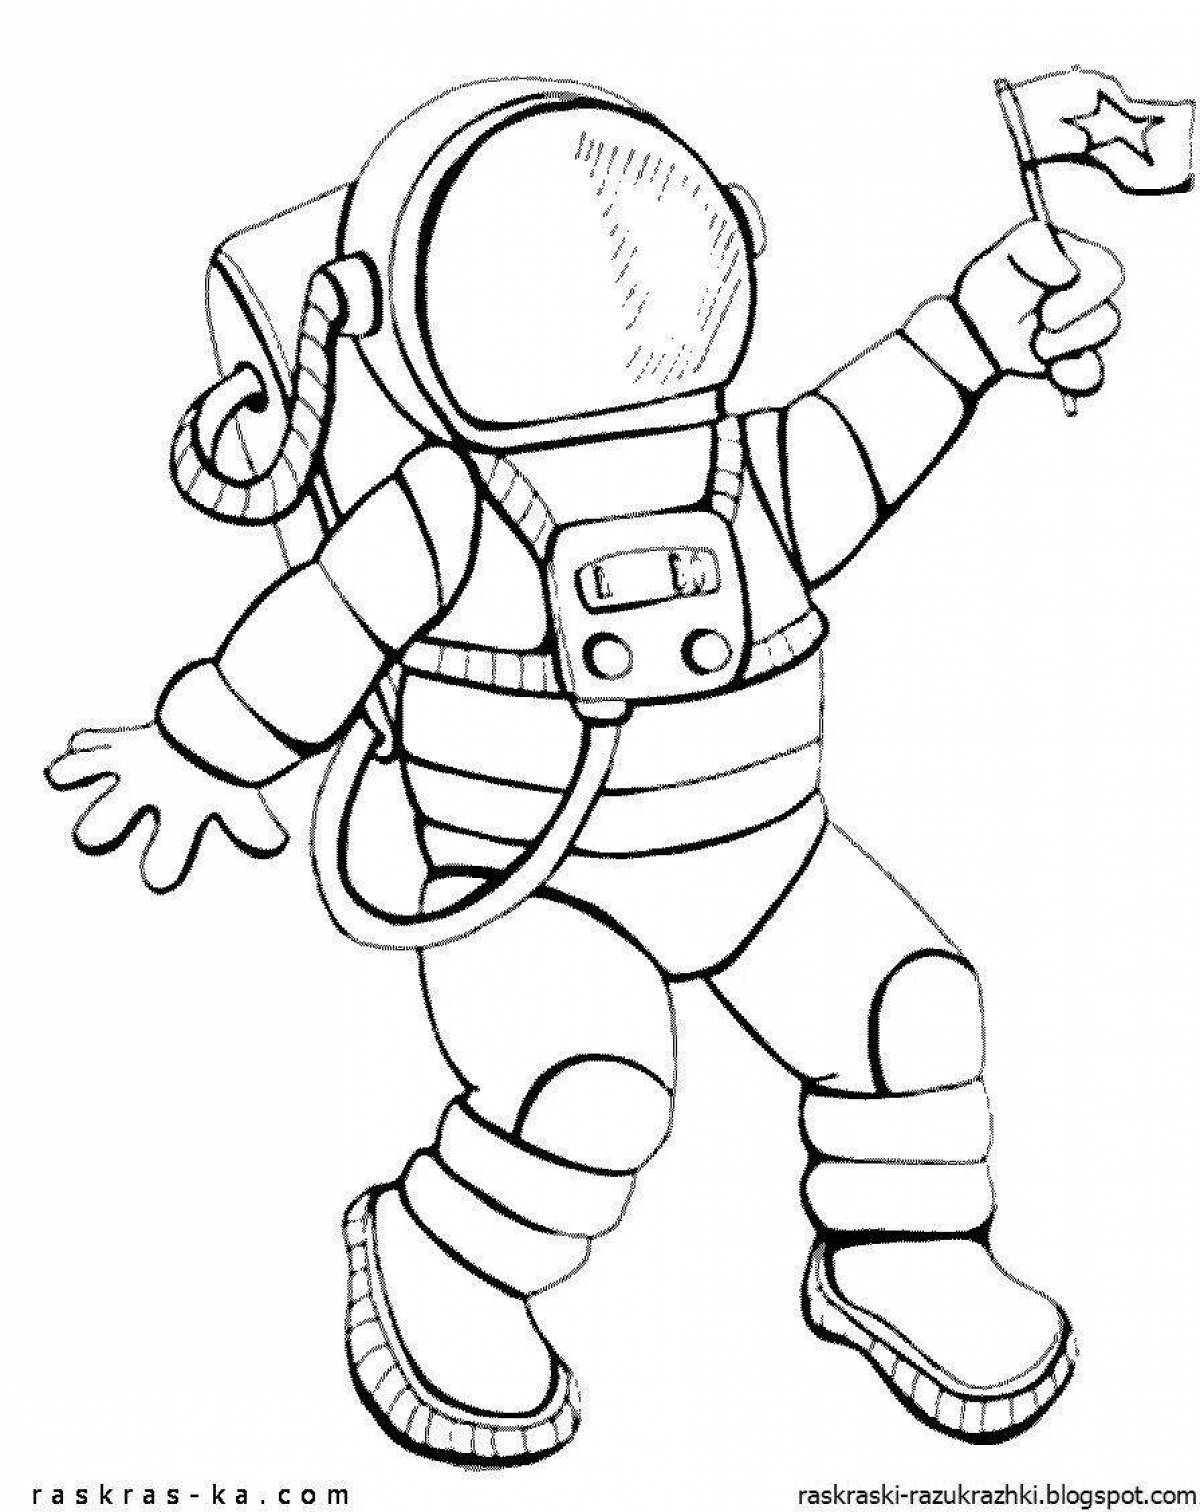 Coloring book great astronaut with space capsule